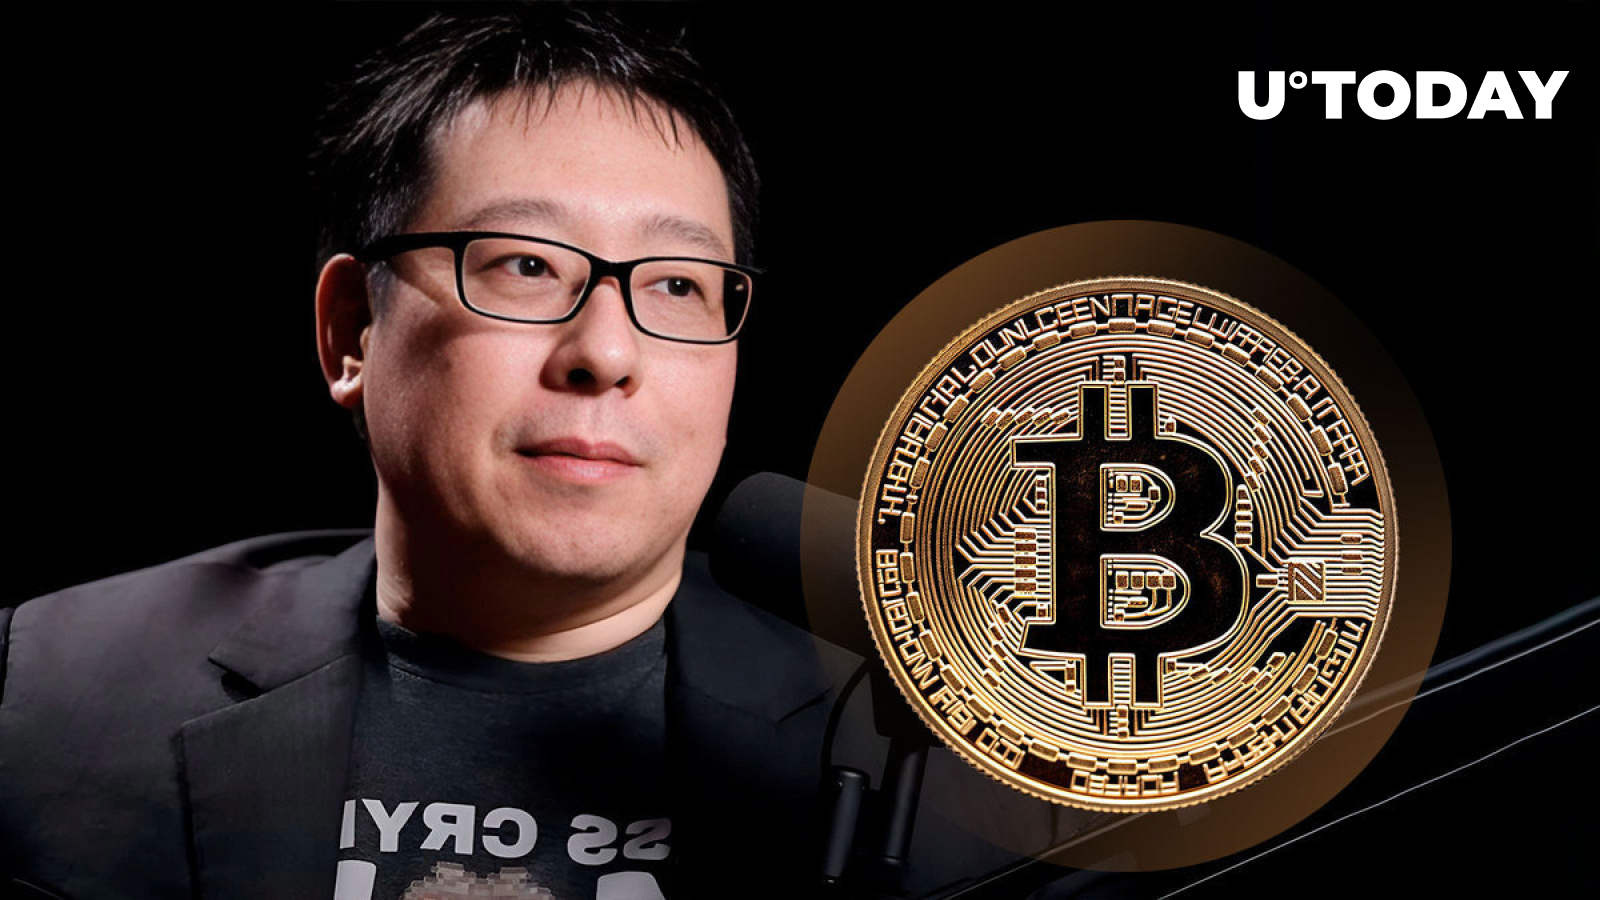 Critical Bitcoin Statement Made by Samson Mow for BTC Maxis